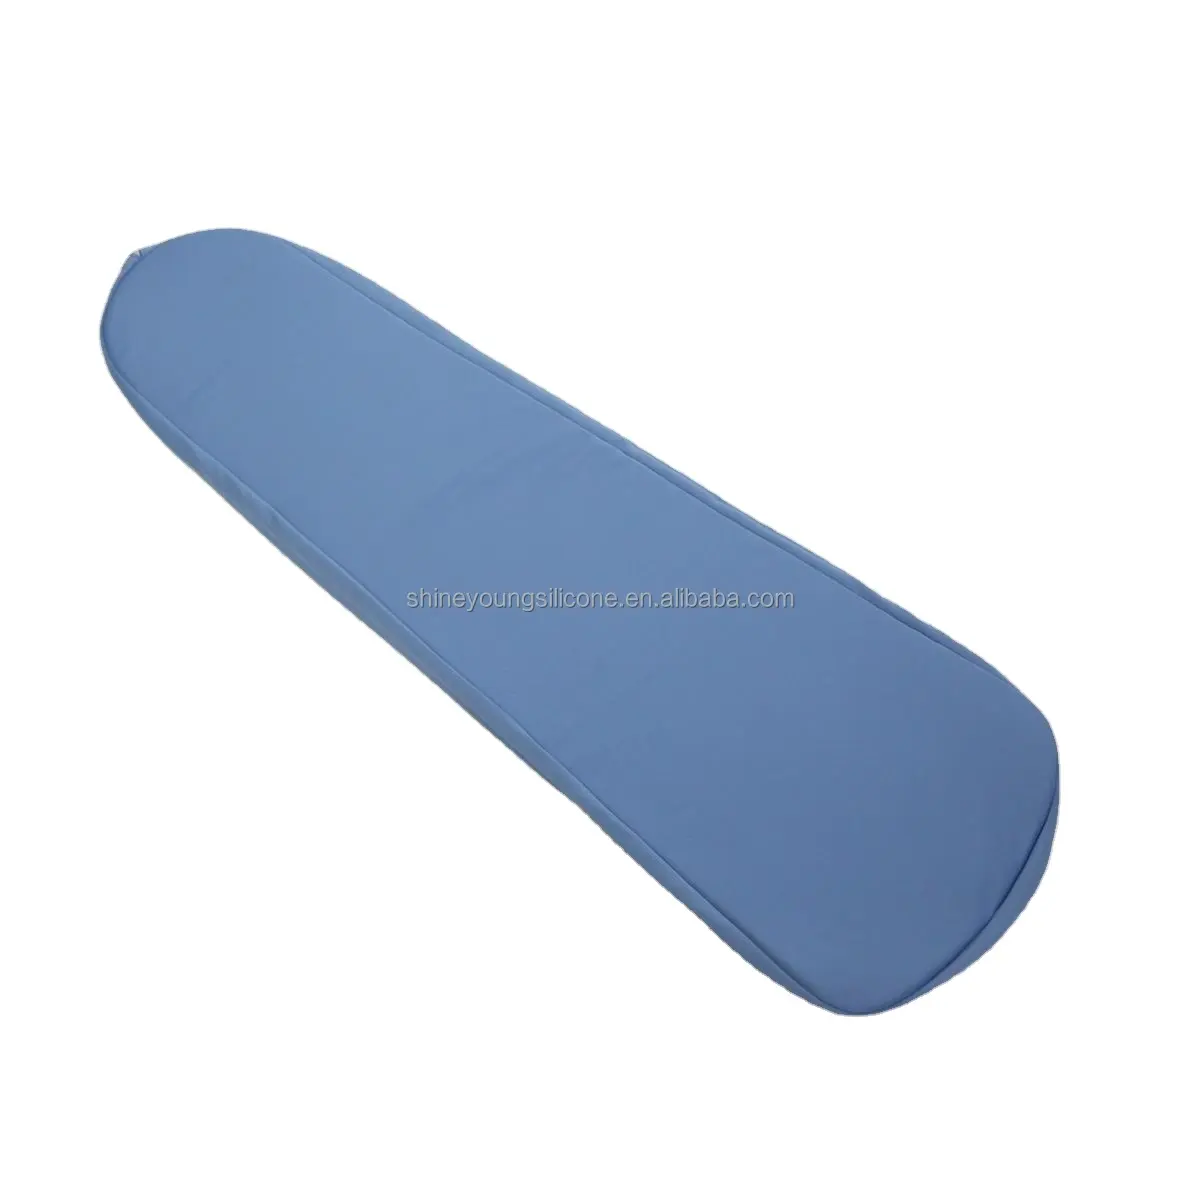 The 47" Universal Workwear Washdown Pad is used on the PONY LAV-U and is of good quality and will last a long time.